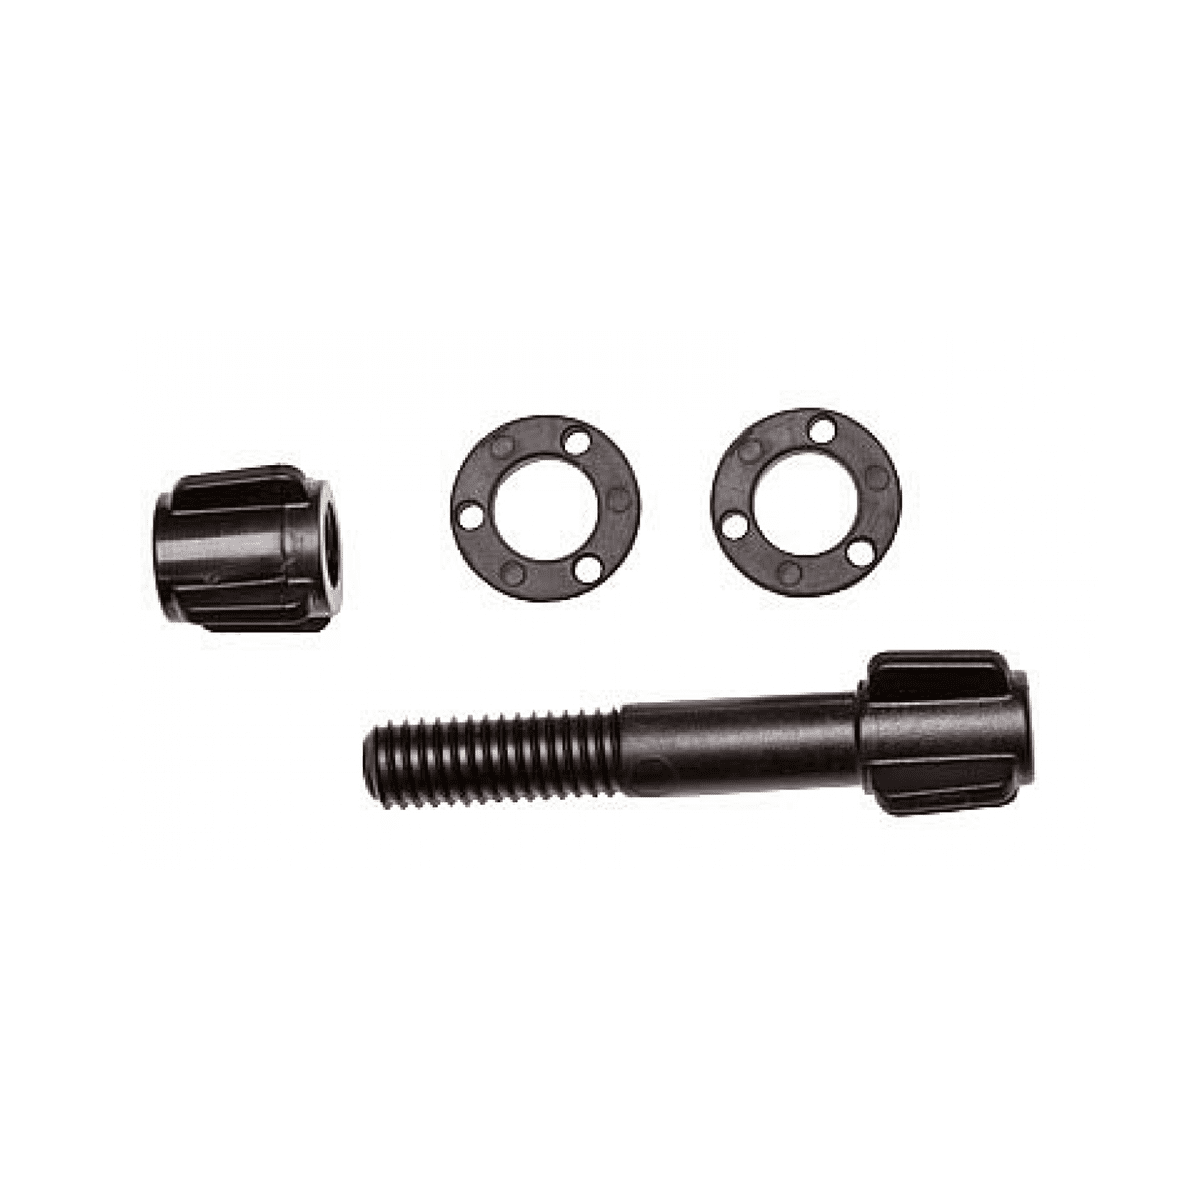 Clevis Coil Hardware Set (screws and washers)